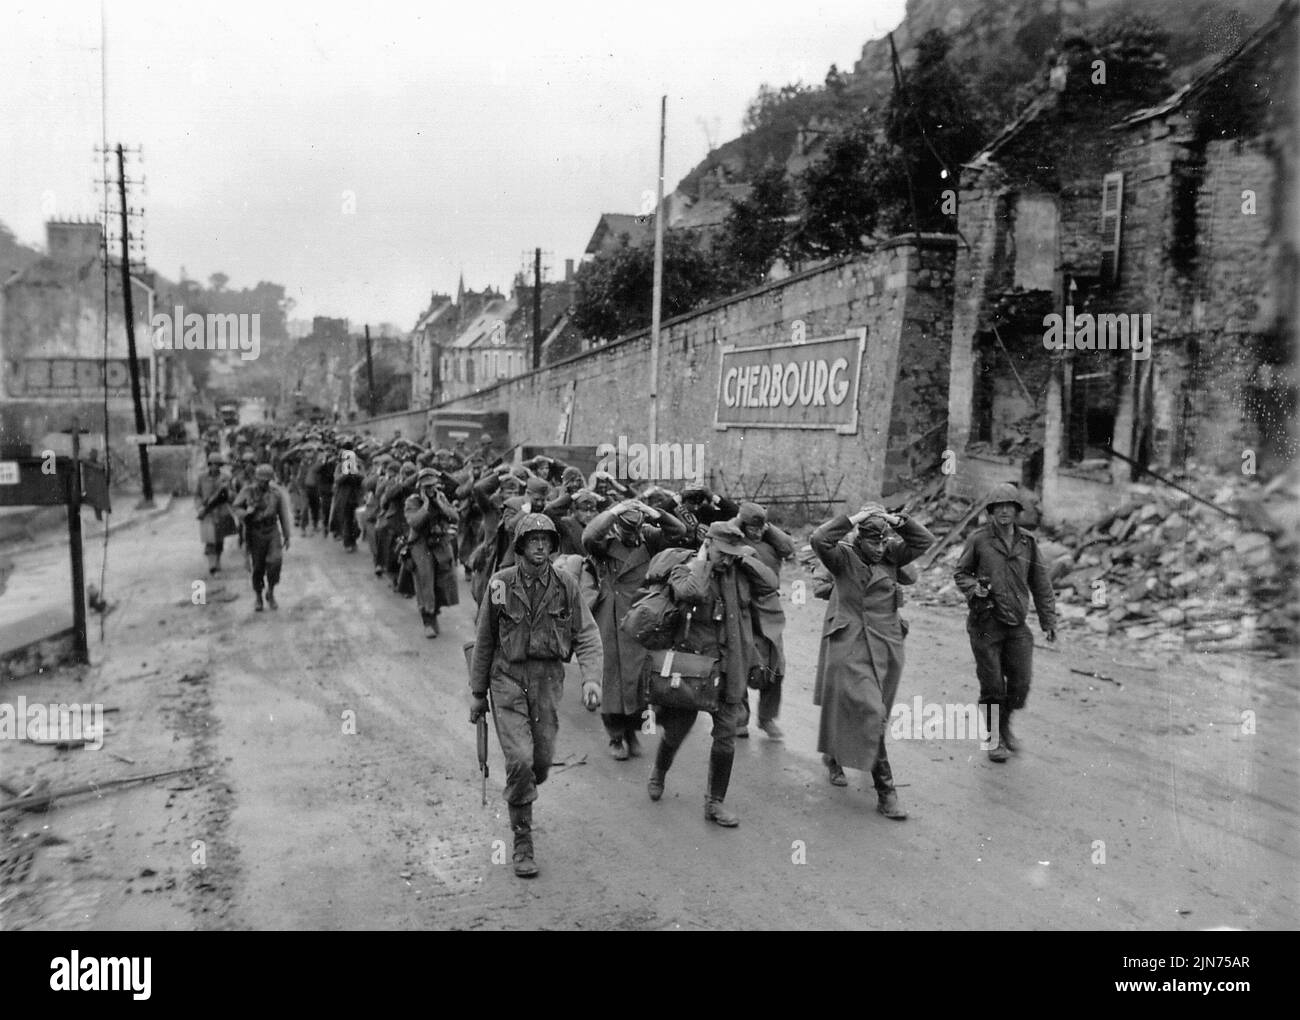 CHERBOURG, FRANCE - 28 June 1944 - US Army soldiers march German army POWs out of Cherbourg France shortly after taking the city during the Normandy I Stock Photo